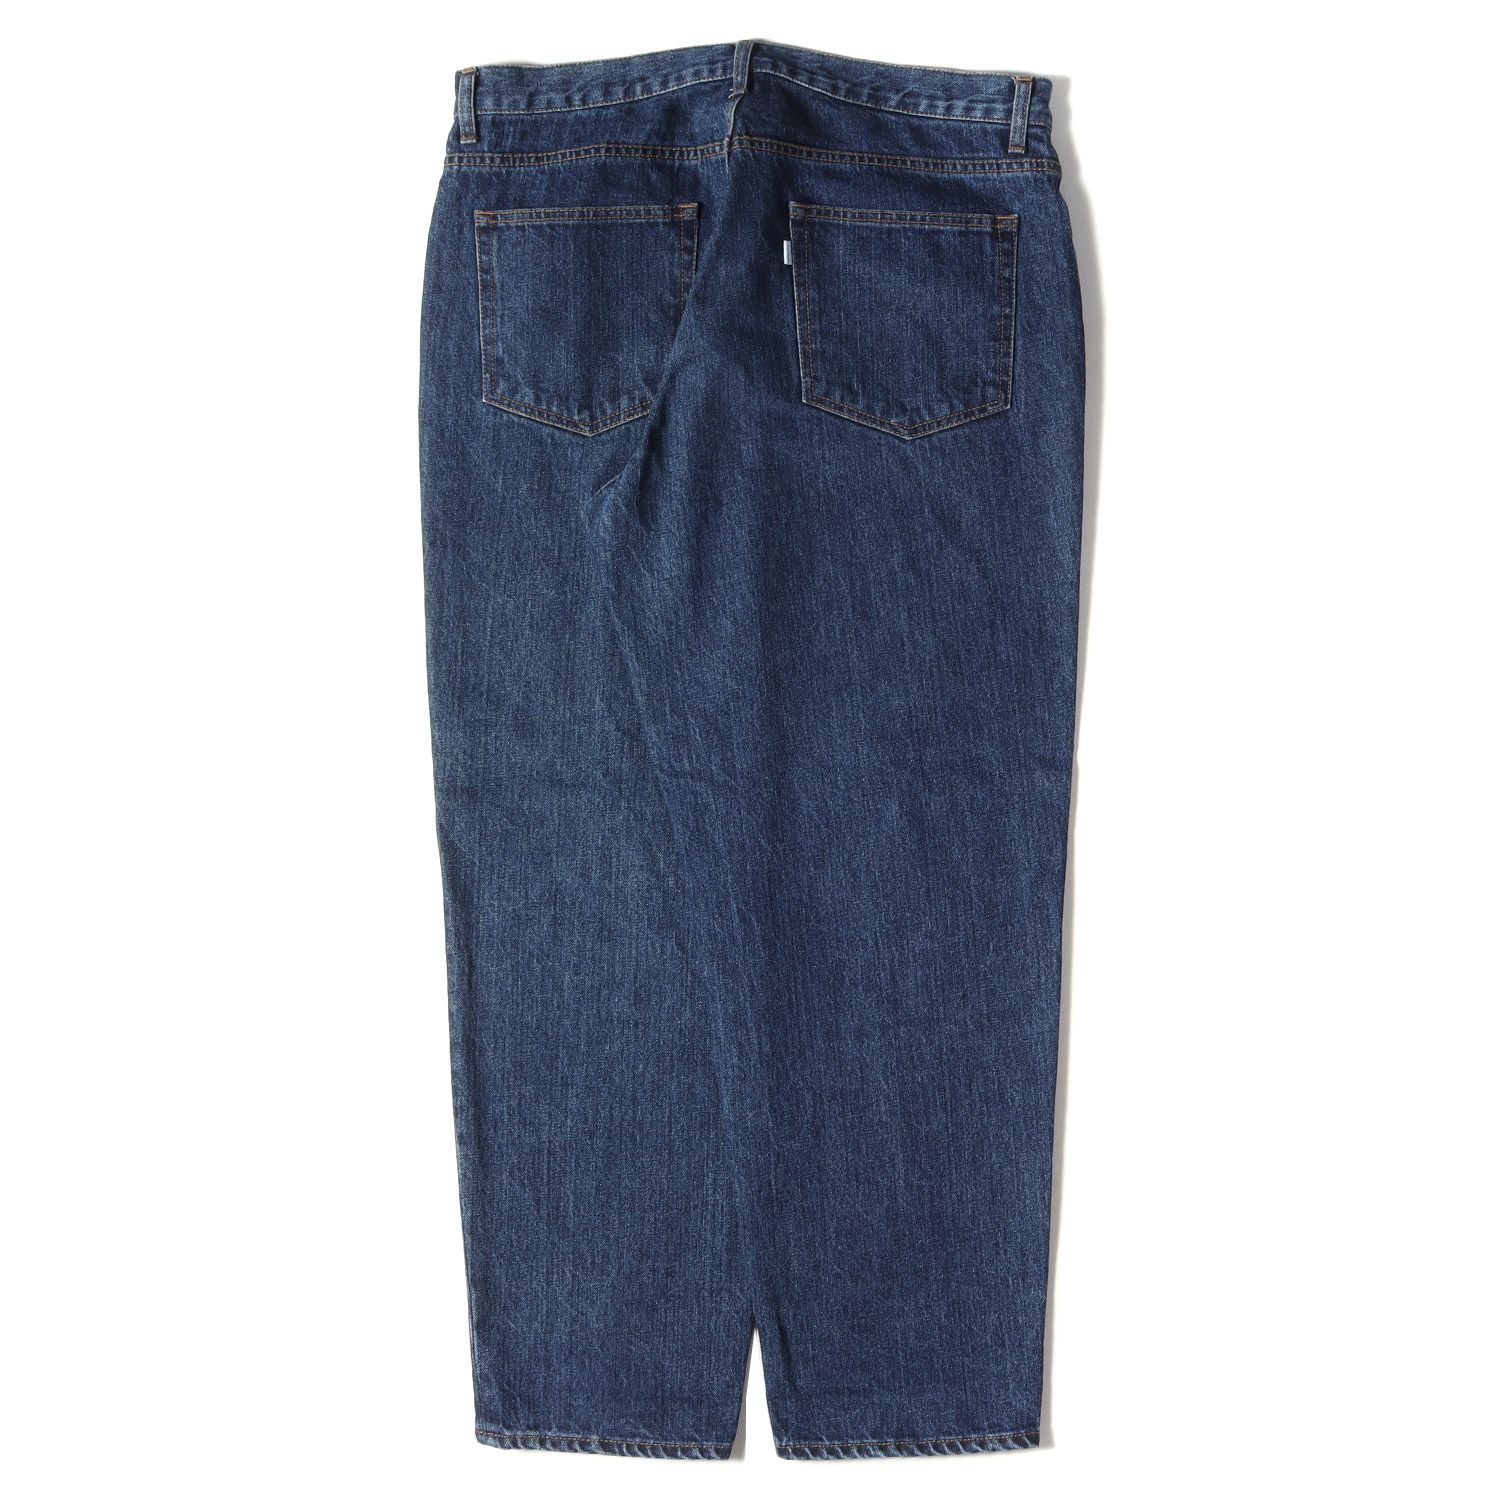 CUP AND CONE Mild Tapered 5 Pocket Jeans